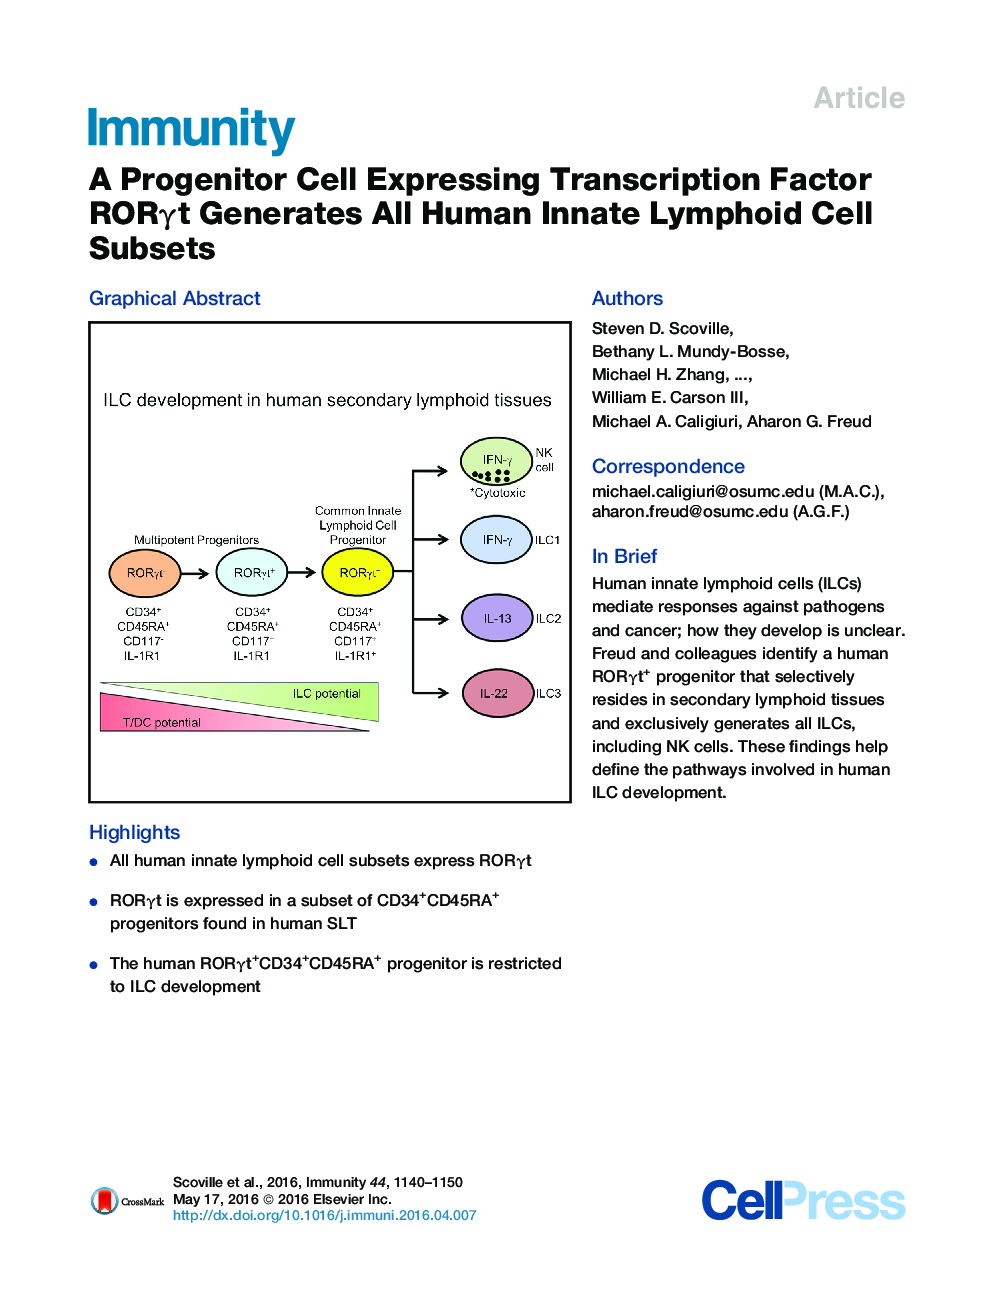 A Progenitor Cell Expressing Transcription Factor RORγt Generates All Human Innate Lymphoid Cell Subsets